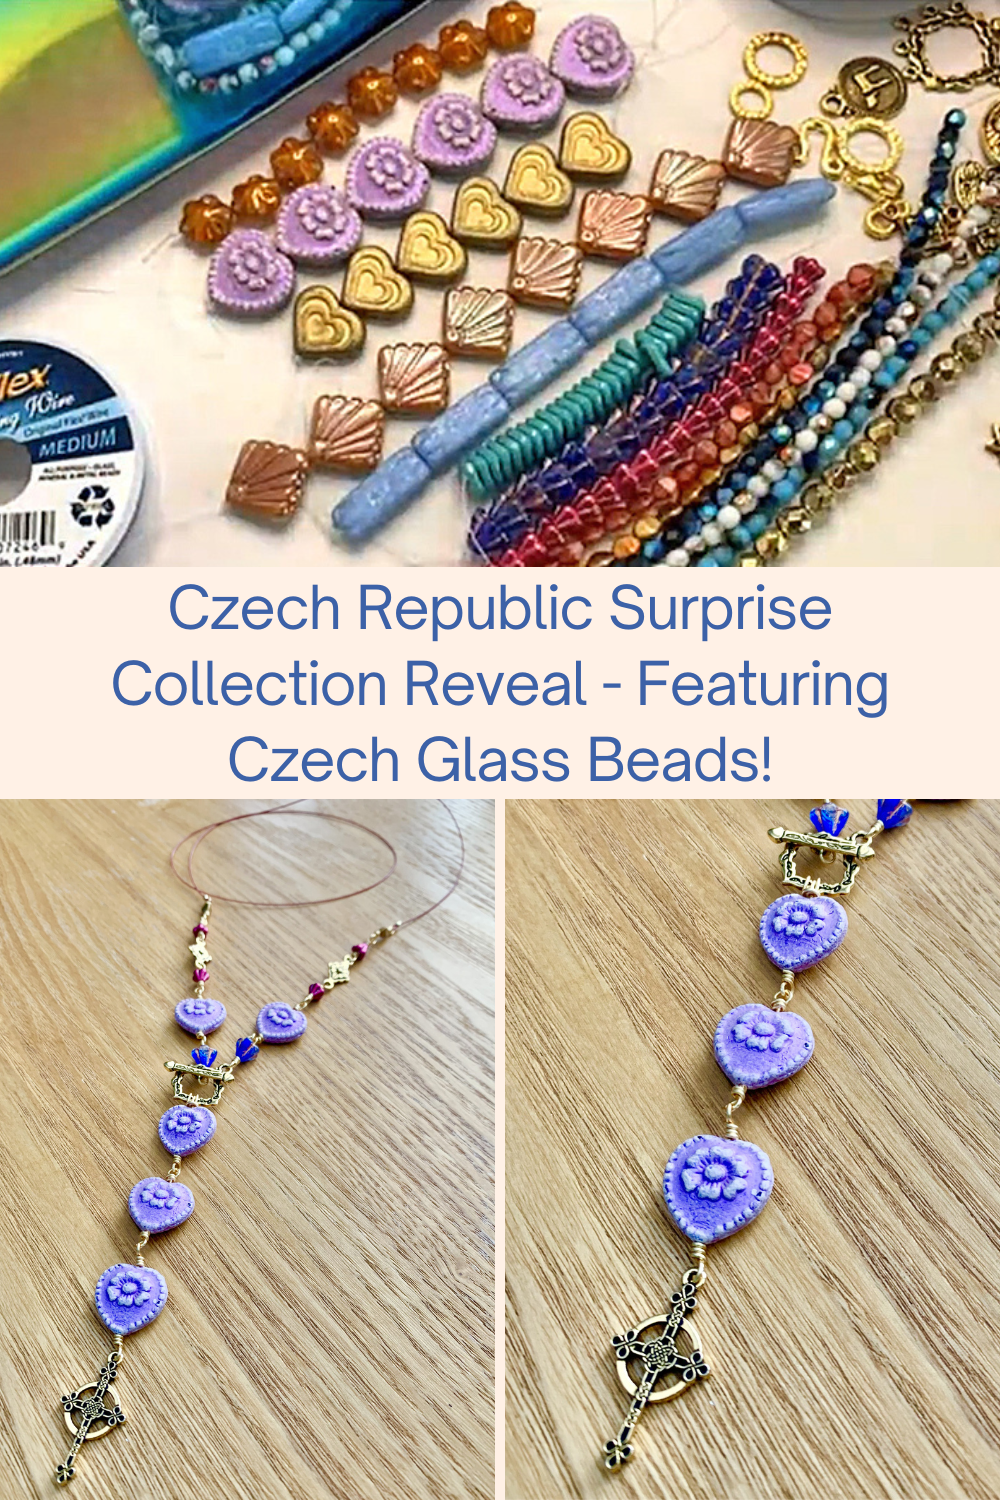 Czech Republic Surprise Collection Reveal - Featuring Czech Glass Beads! Collage